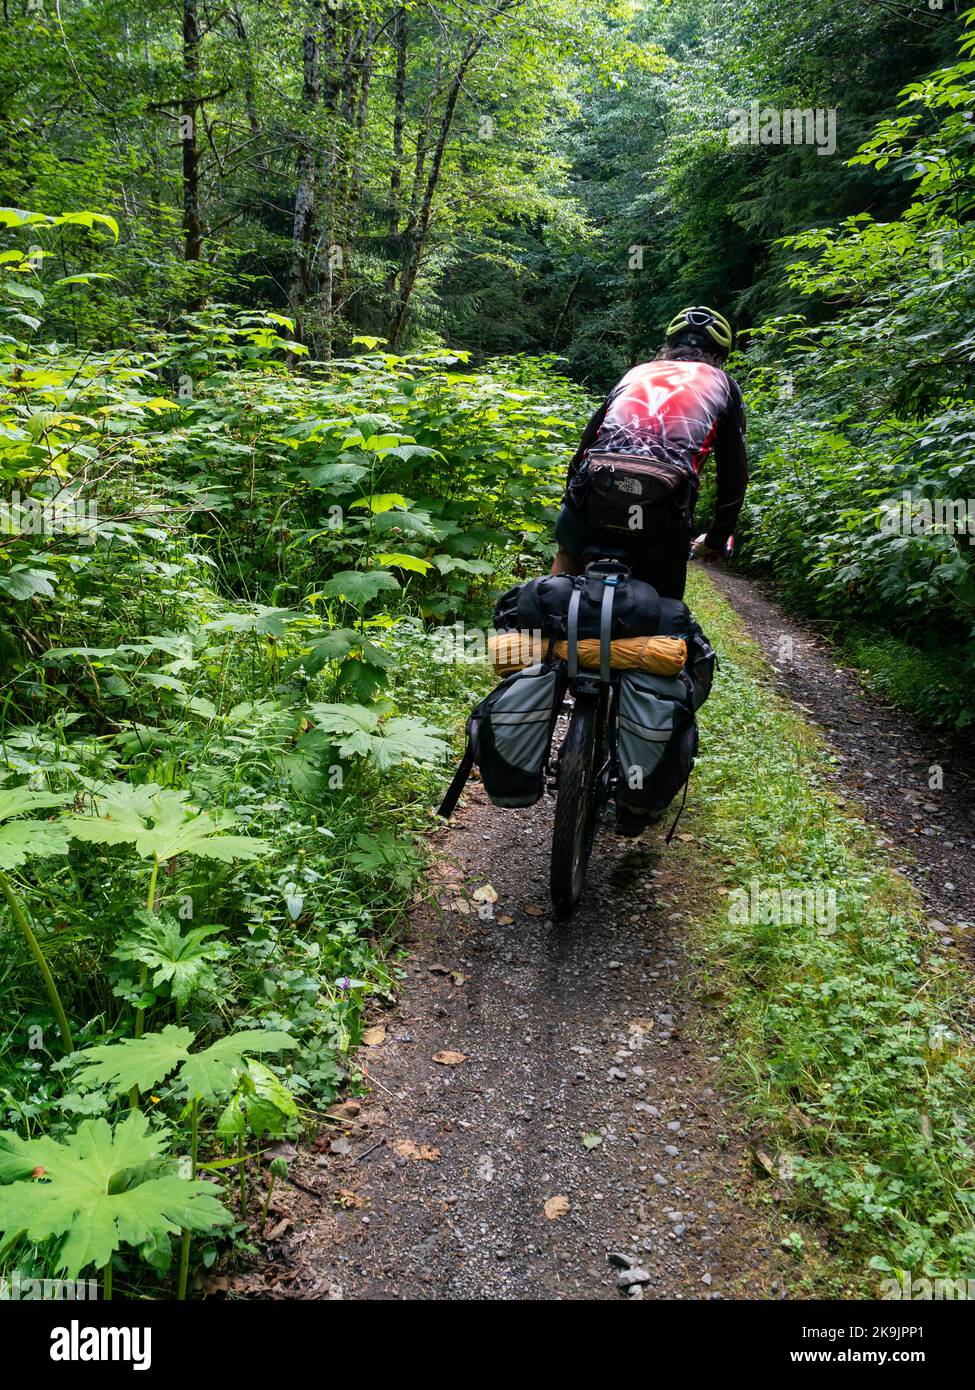 WA22654-00...WASHINGTON - Cyclist working his way along an overgrown forest road in the Olympic National Forest, following the Cross Washington gravel Stock Photo